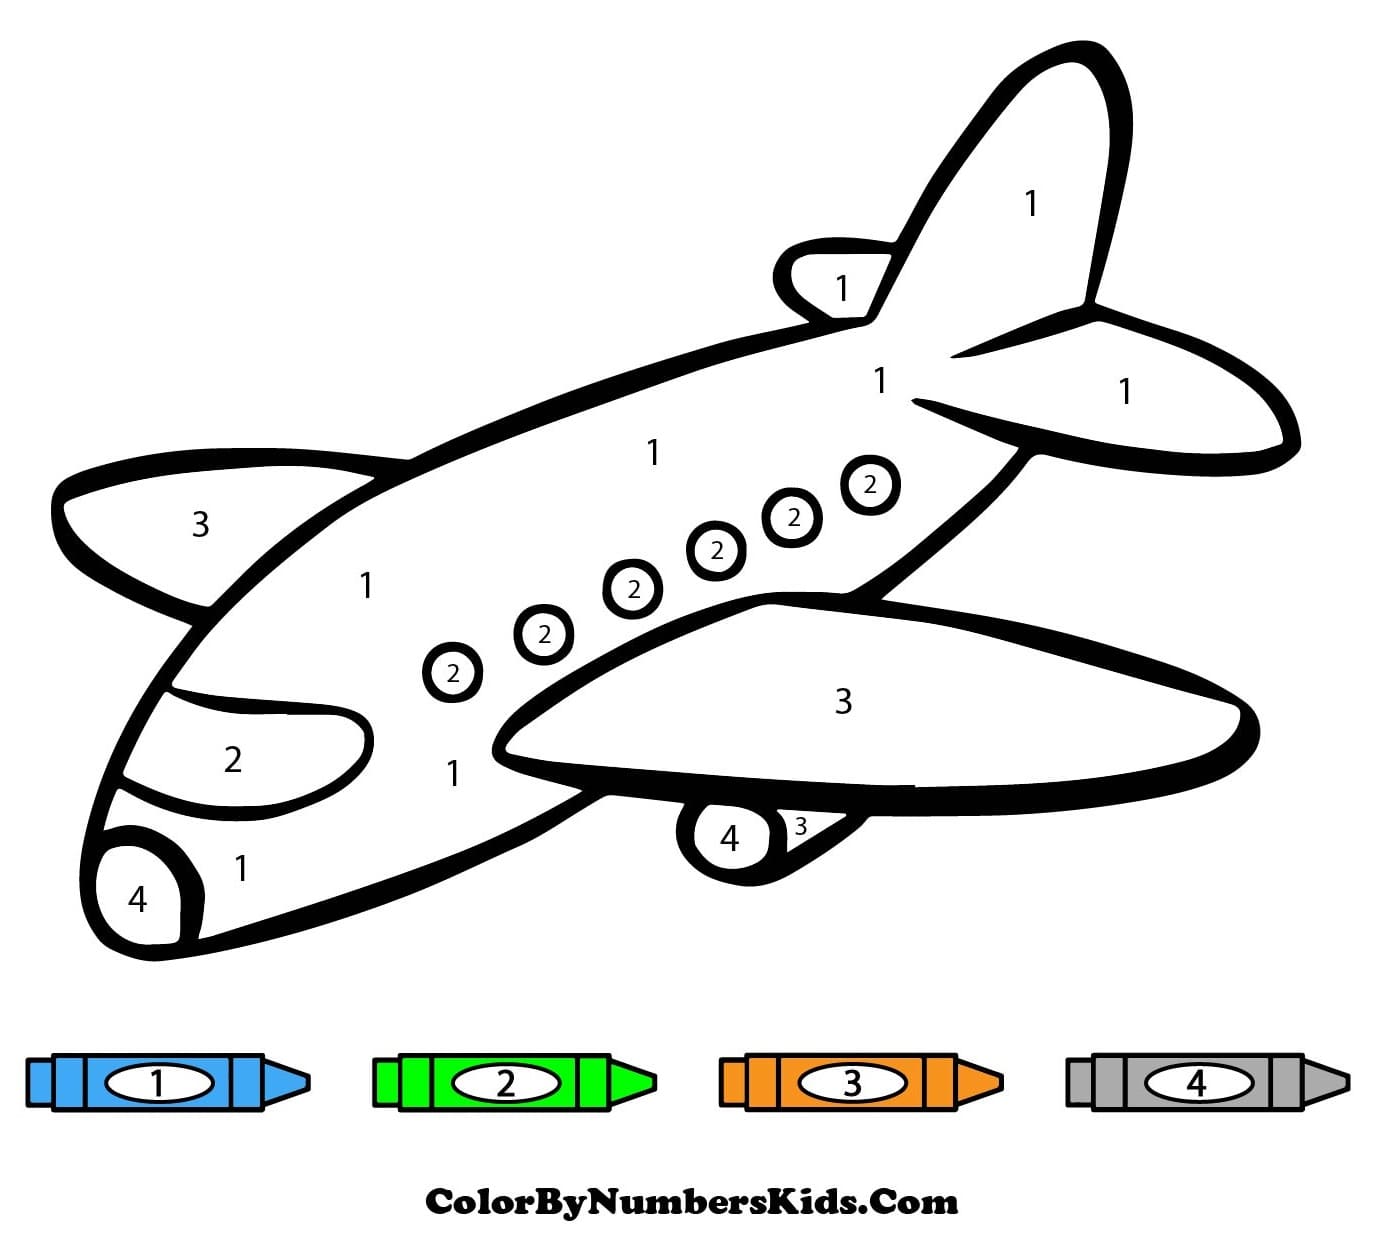 Normal Airplane Color By Number